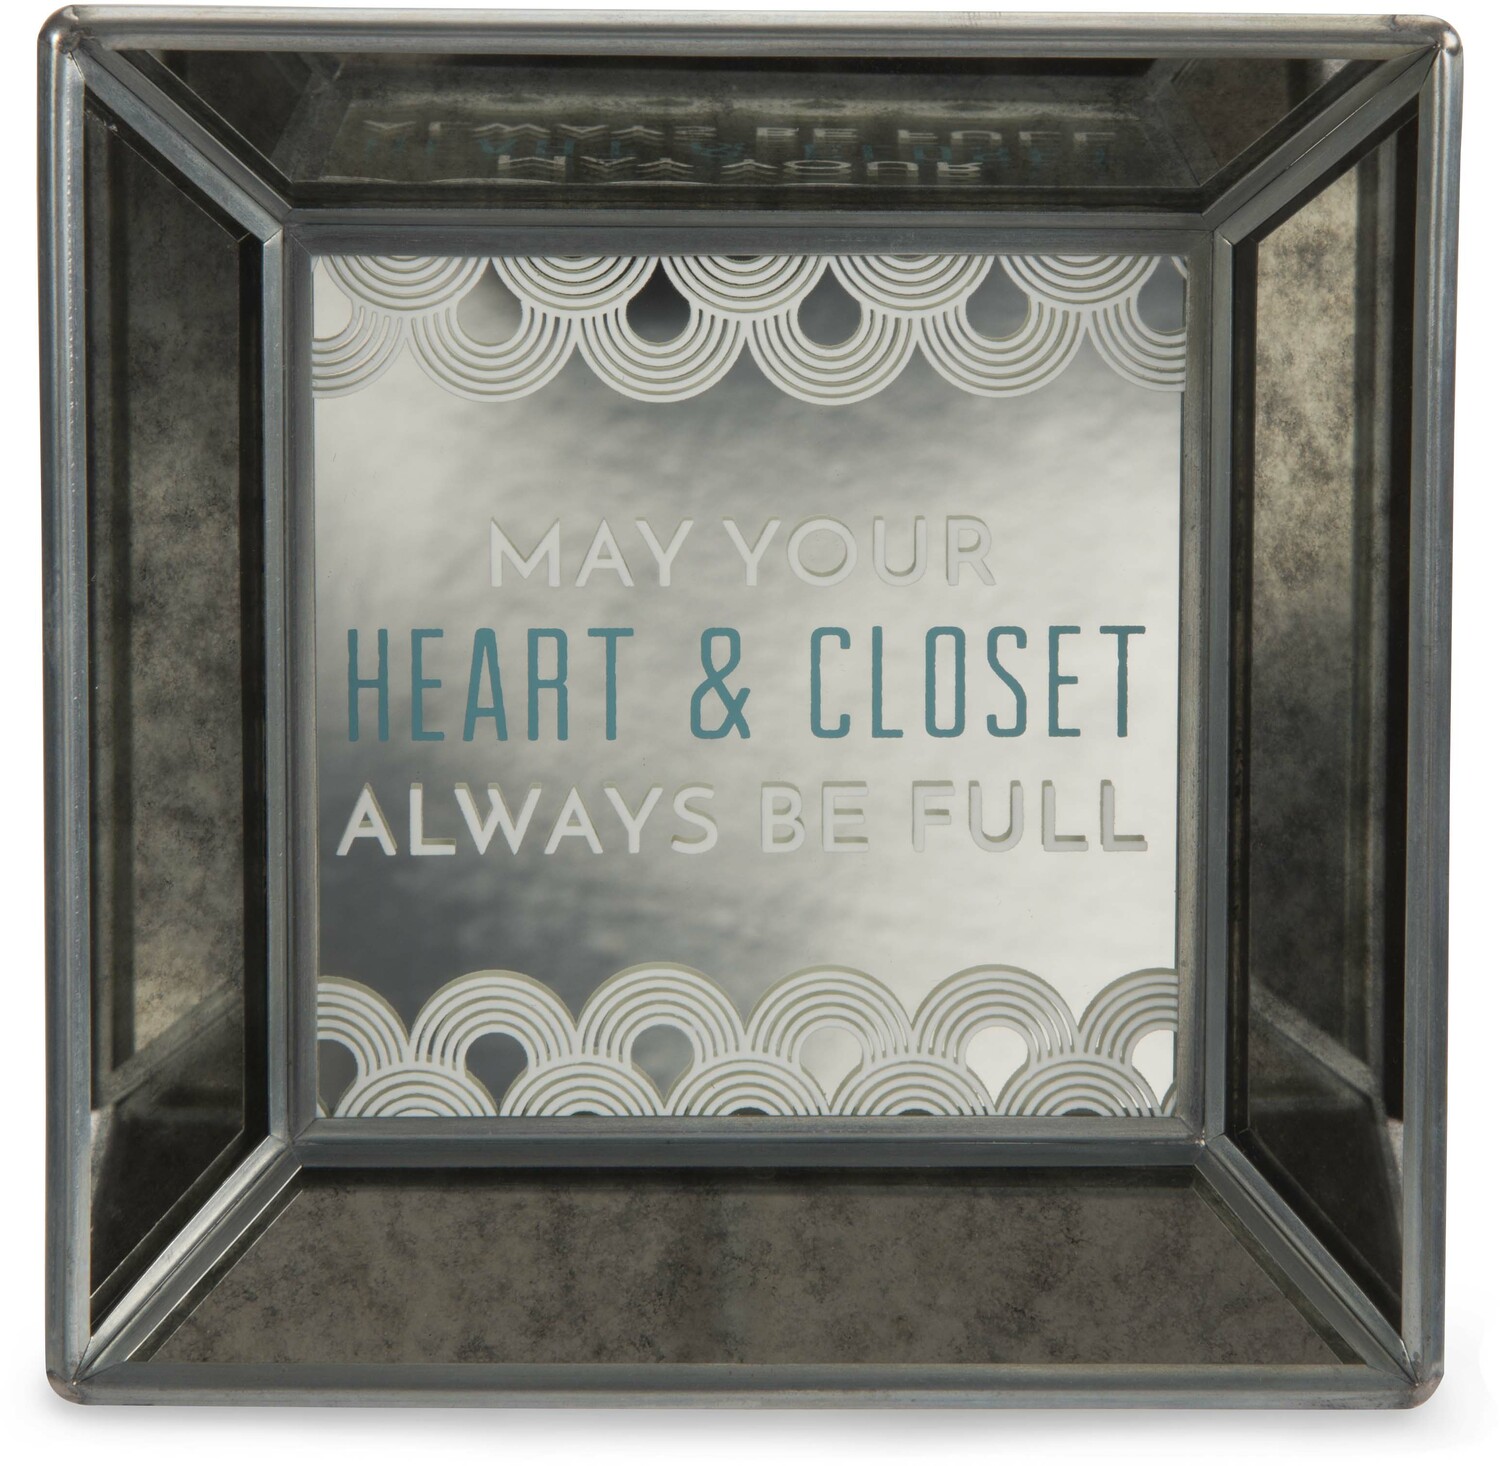 Heart & Closet by Pretty Inappropriate - Heart & Closet - 5" Mirrored Easel Back Plaque